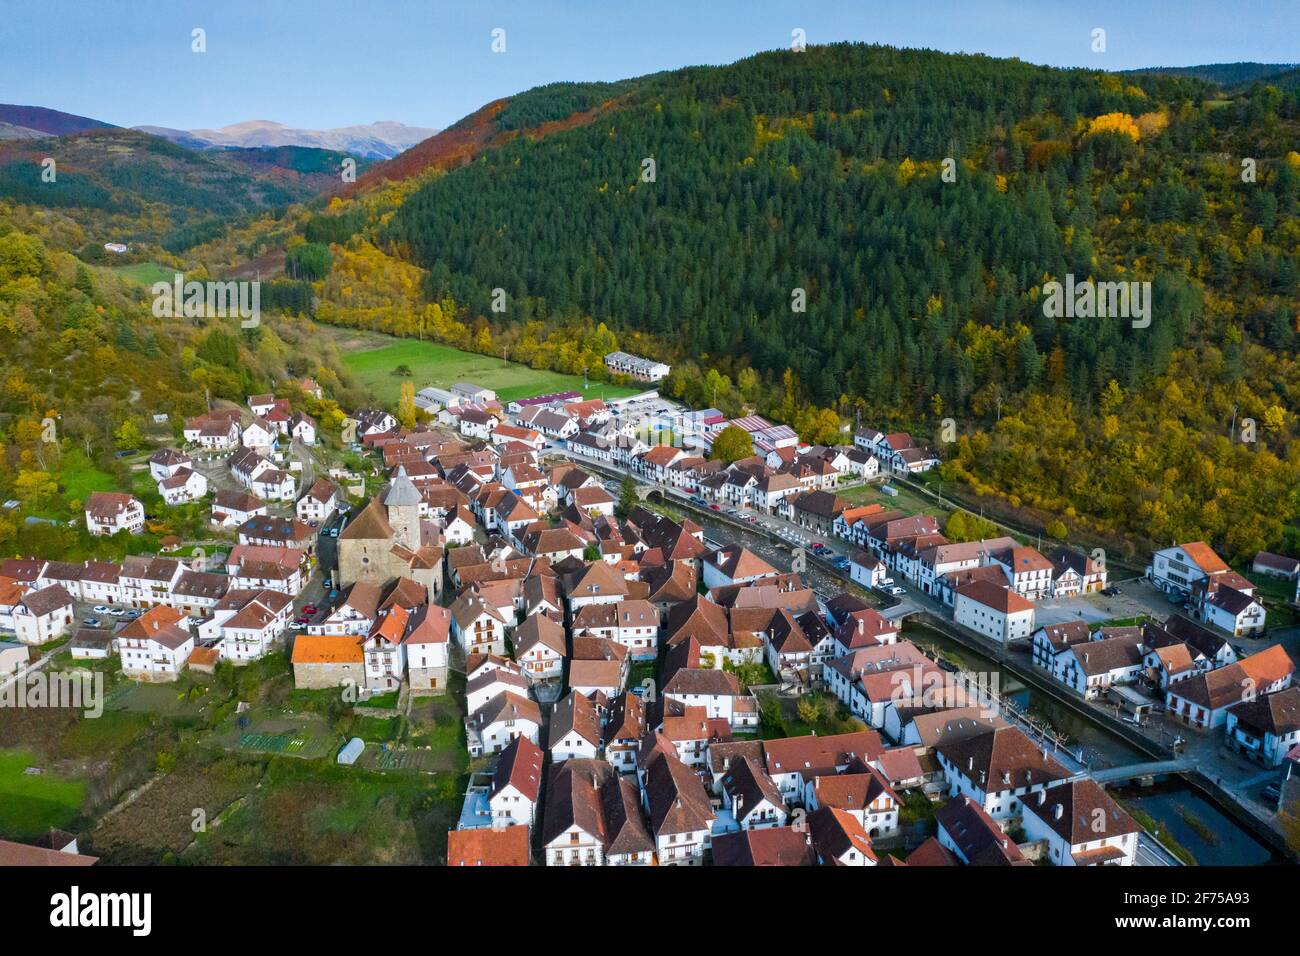 Aerial view of a village in a mountainous area. Stock Photo